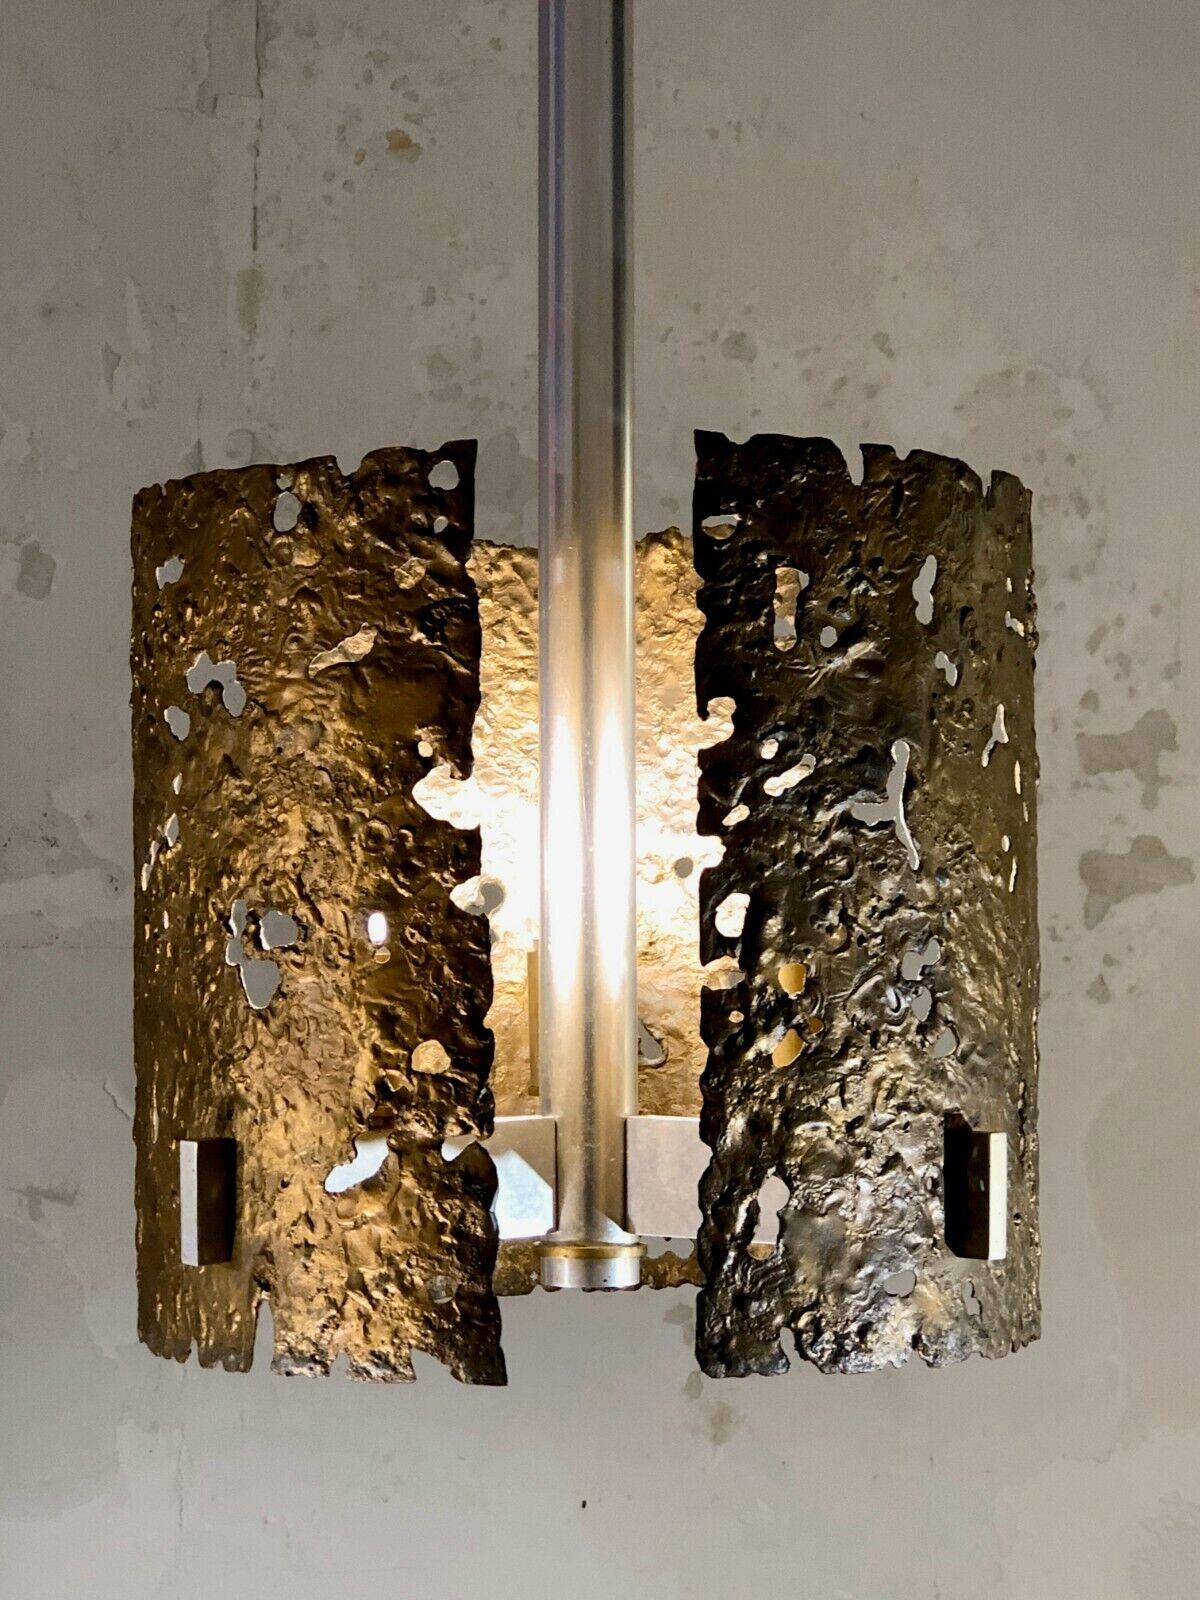 An exceptional suspension, pendant or even a luminous sculpture made of three arms of light, Art-Déco, Modernist, Brutalist, with pieces and joints in aluminum, cylindric massive axis holding three small light arms with three hanging sculptural